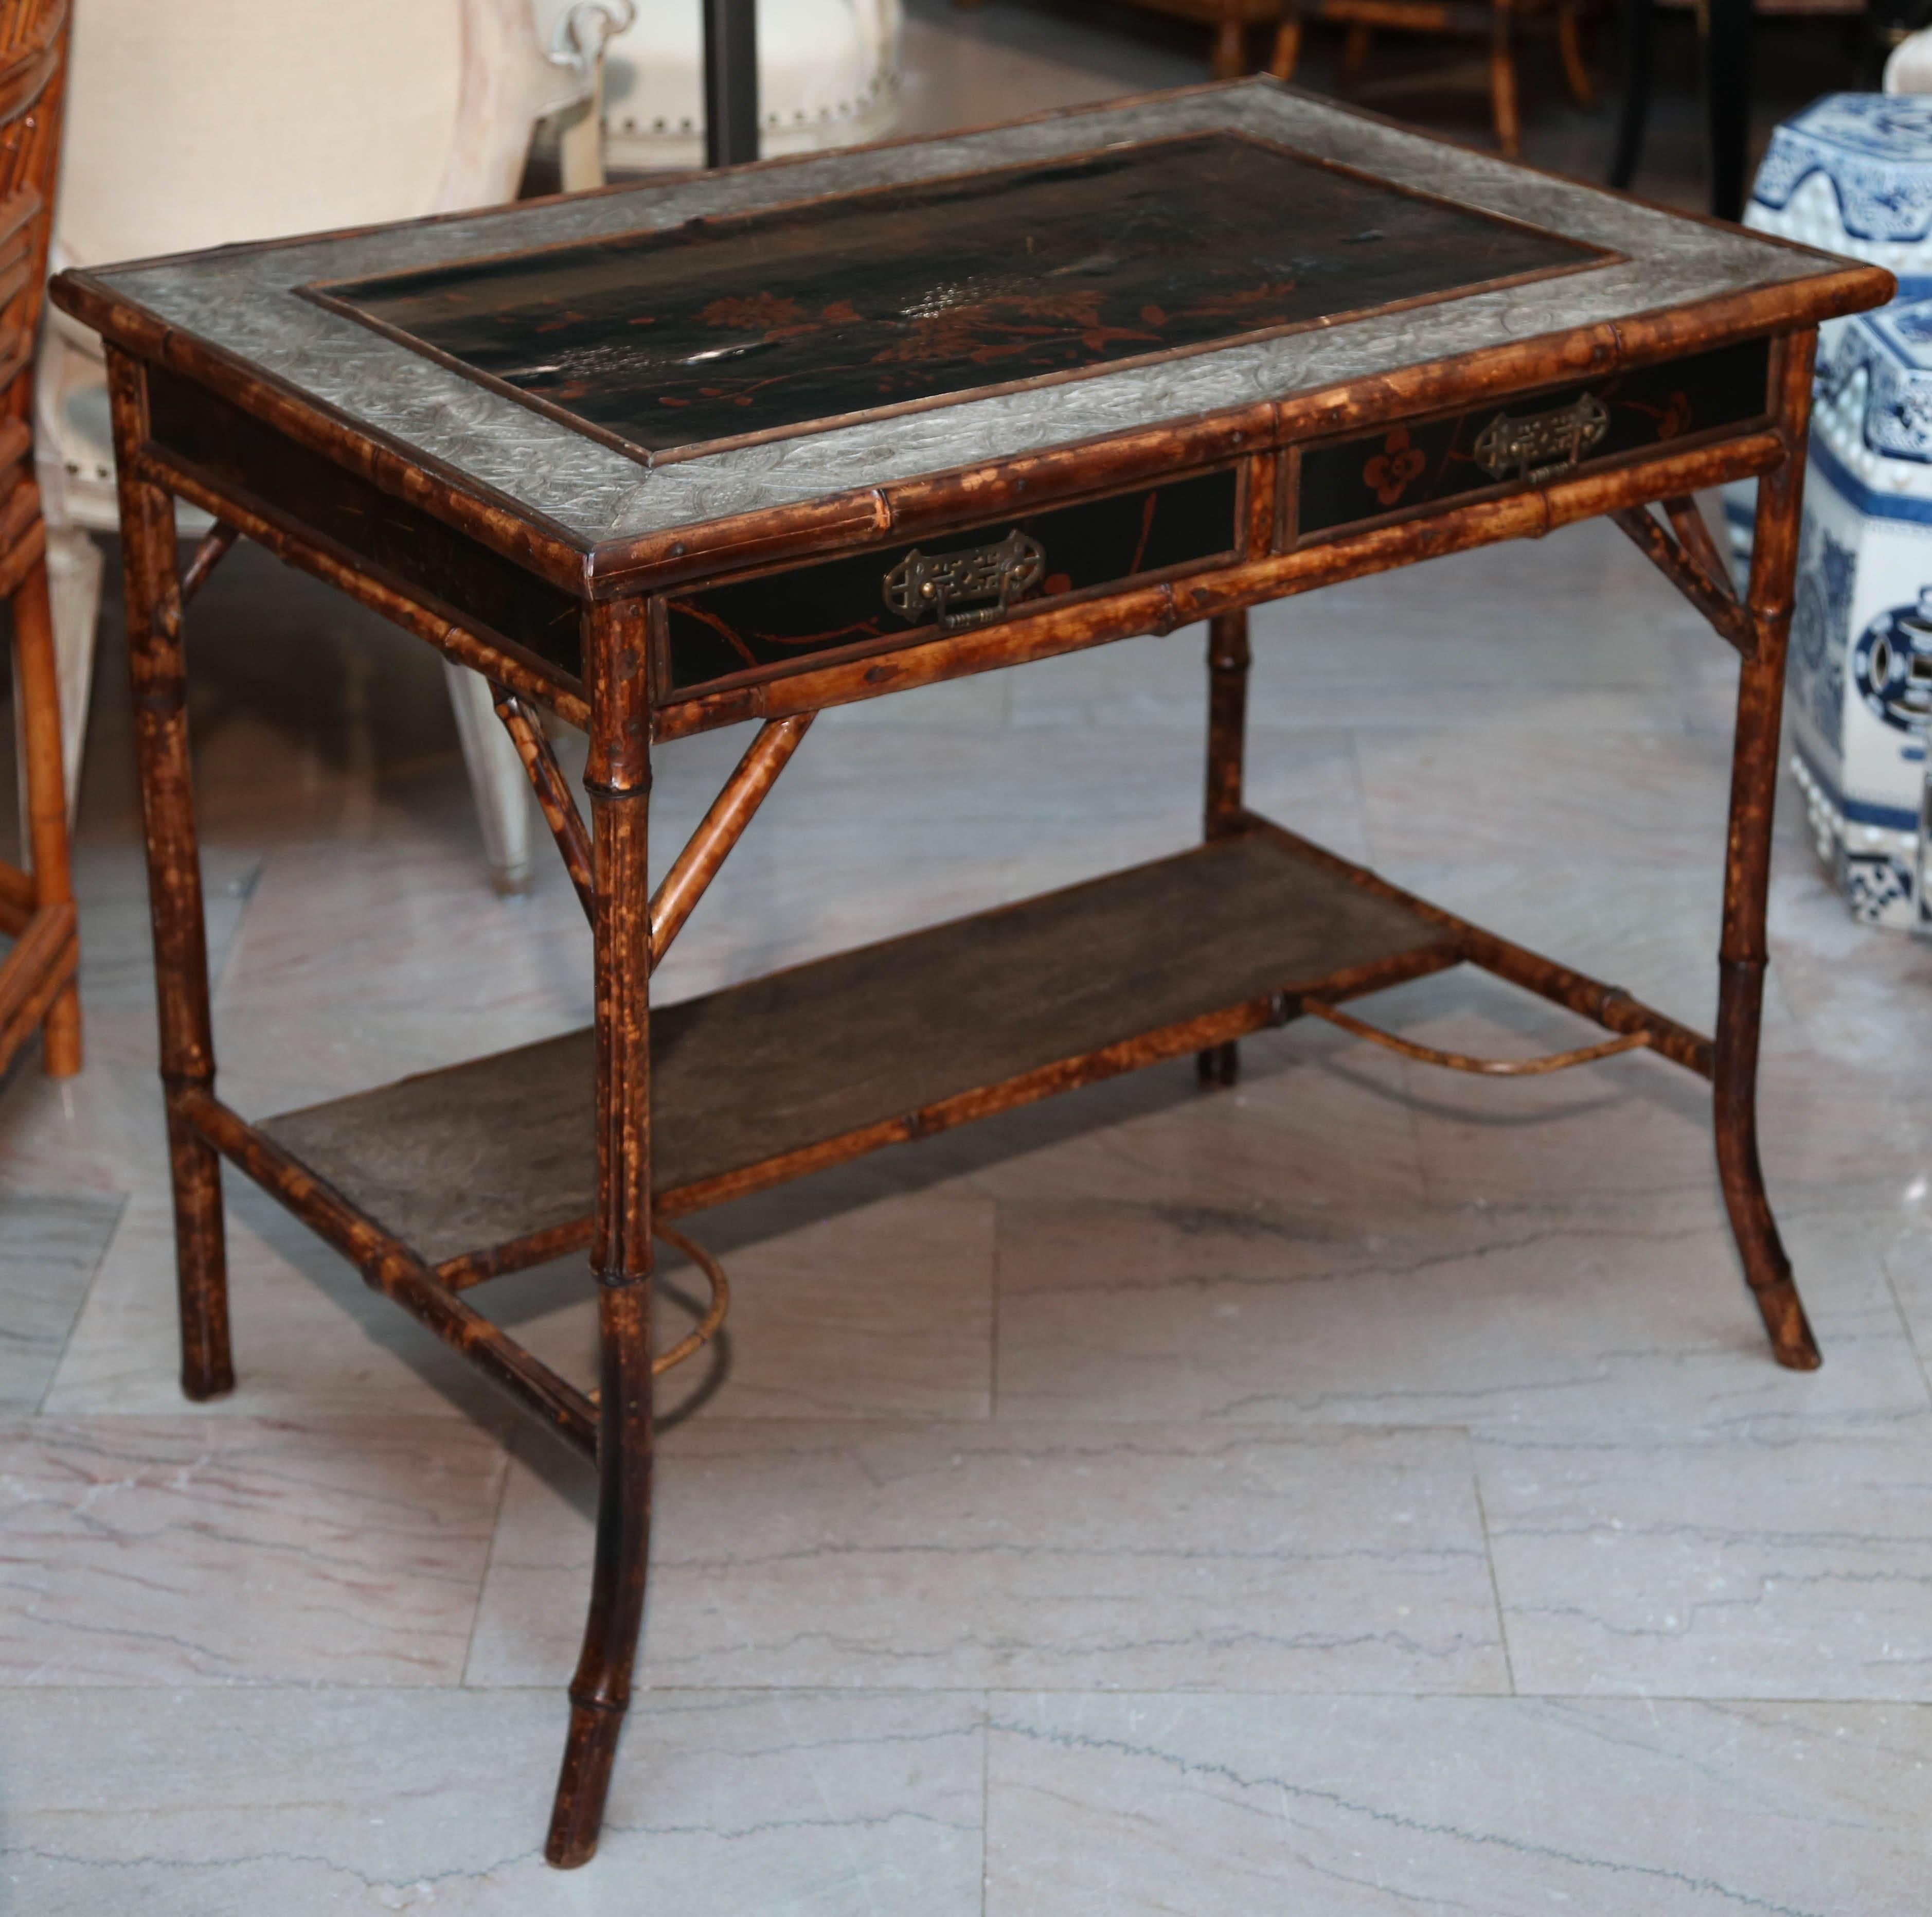 Japanned top and shelf accent this elegant Edwardian example -fitted with drawers.

 